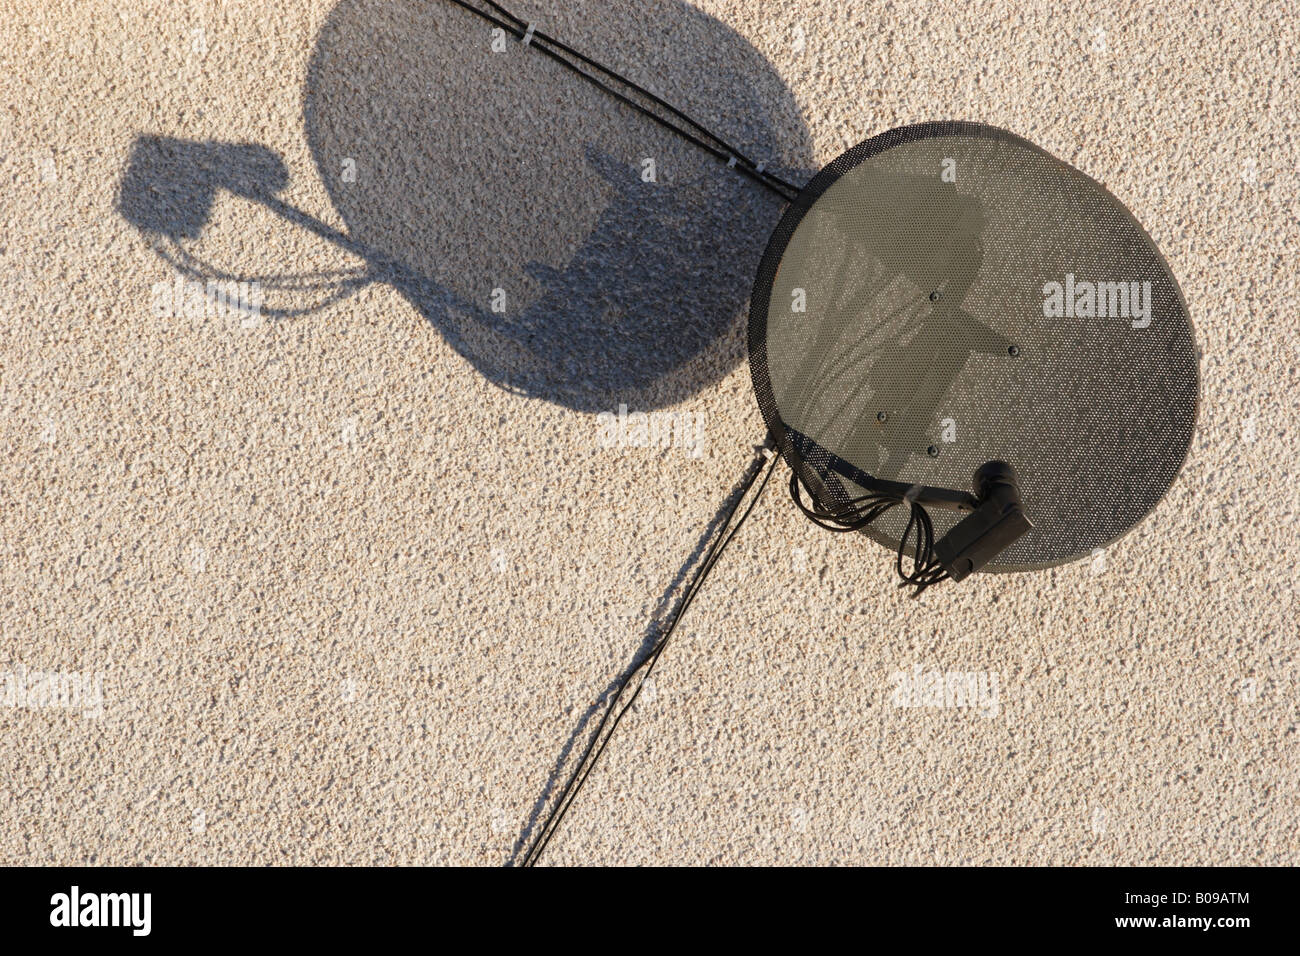 A satellite dish receiver fixed to a plain wall. Stock Photo